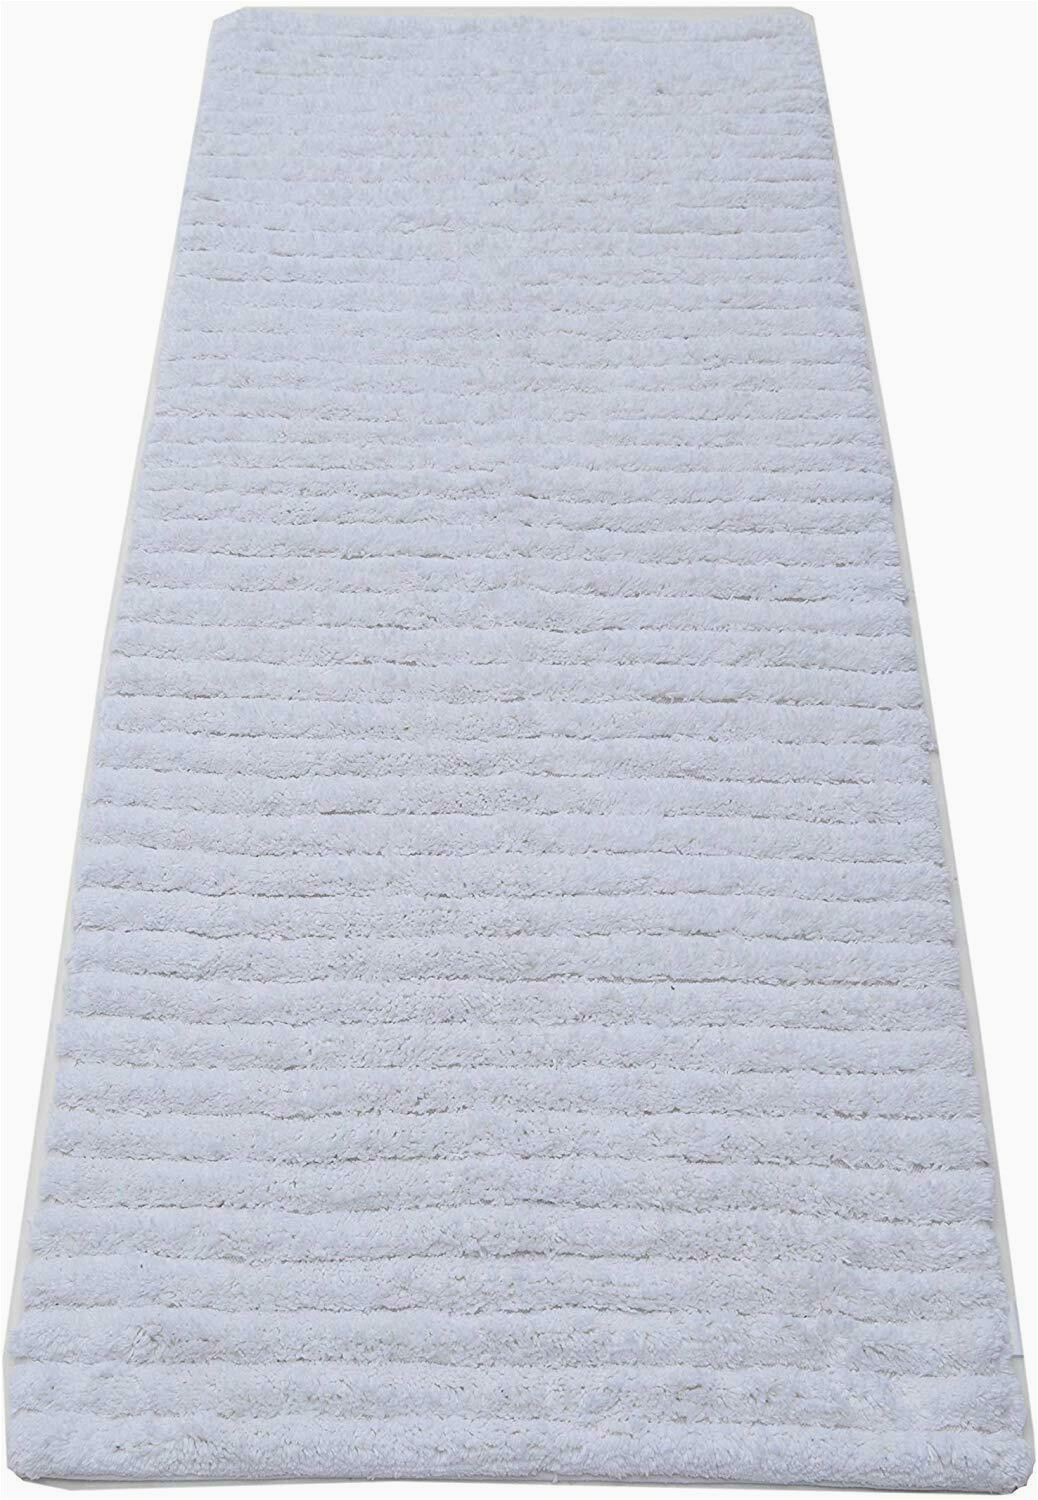 Cotton Bath Rugs with Latex Backing Chardin Home Highland Stripe Bathroom Rug with Latex Spray Non Skid Backing 20